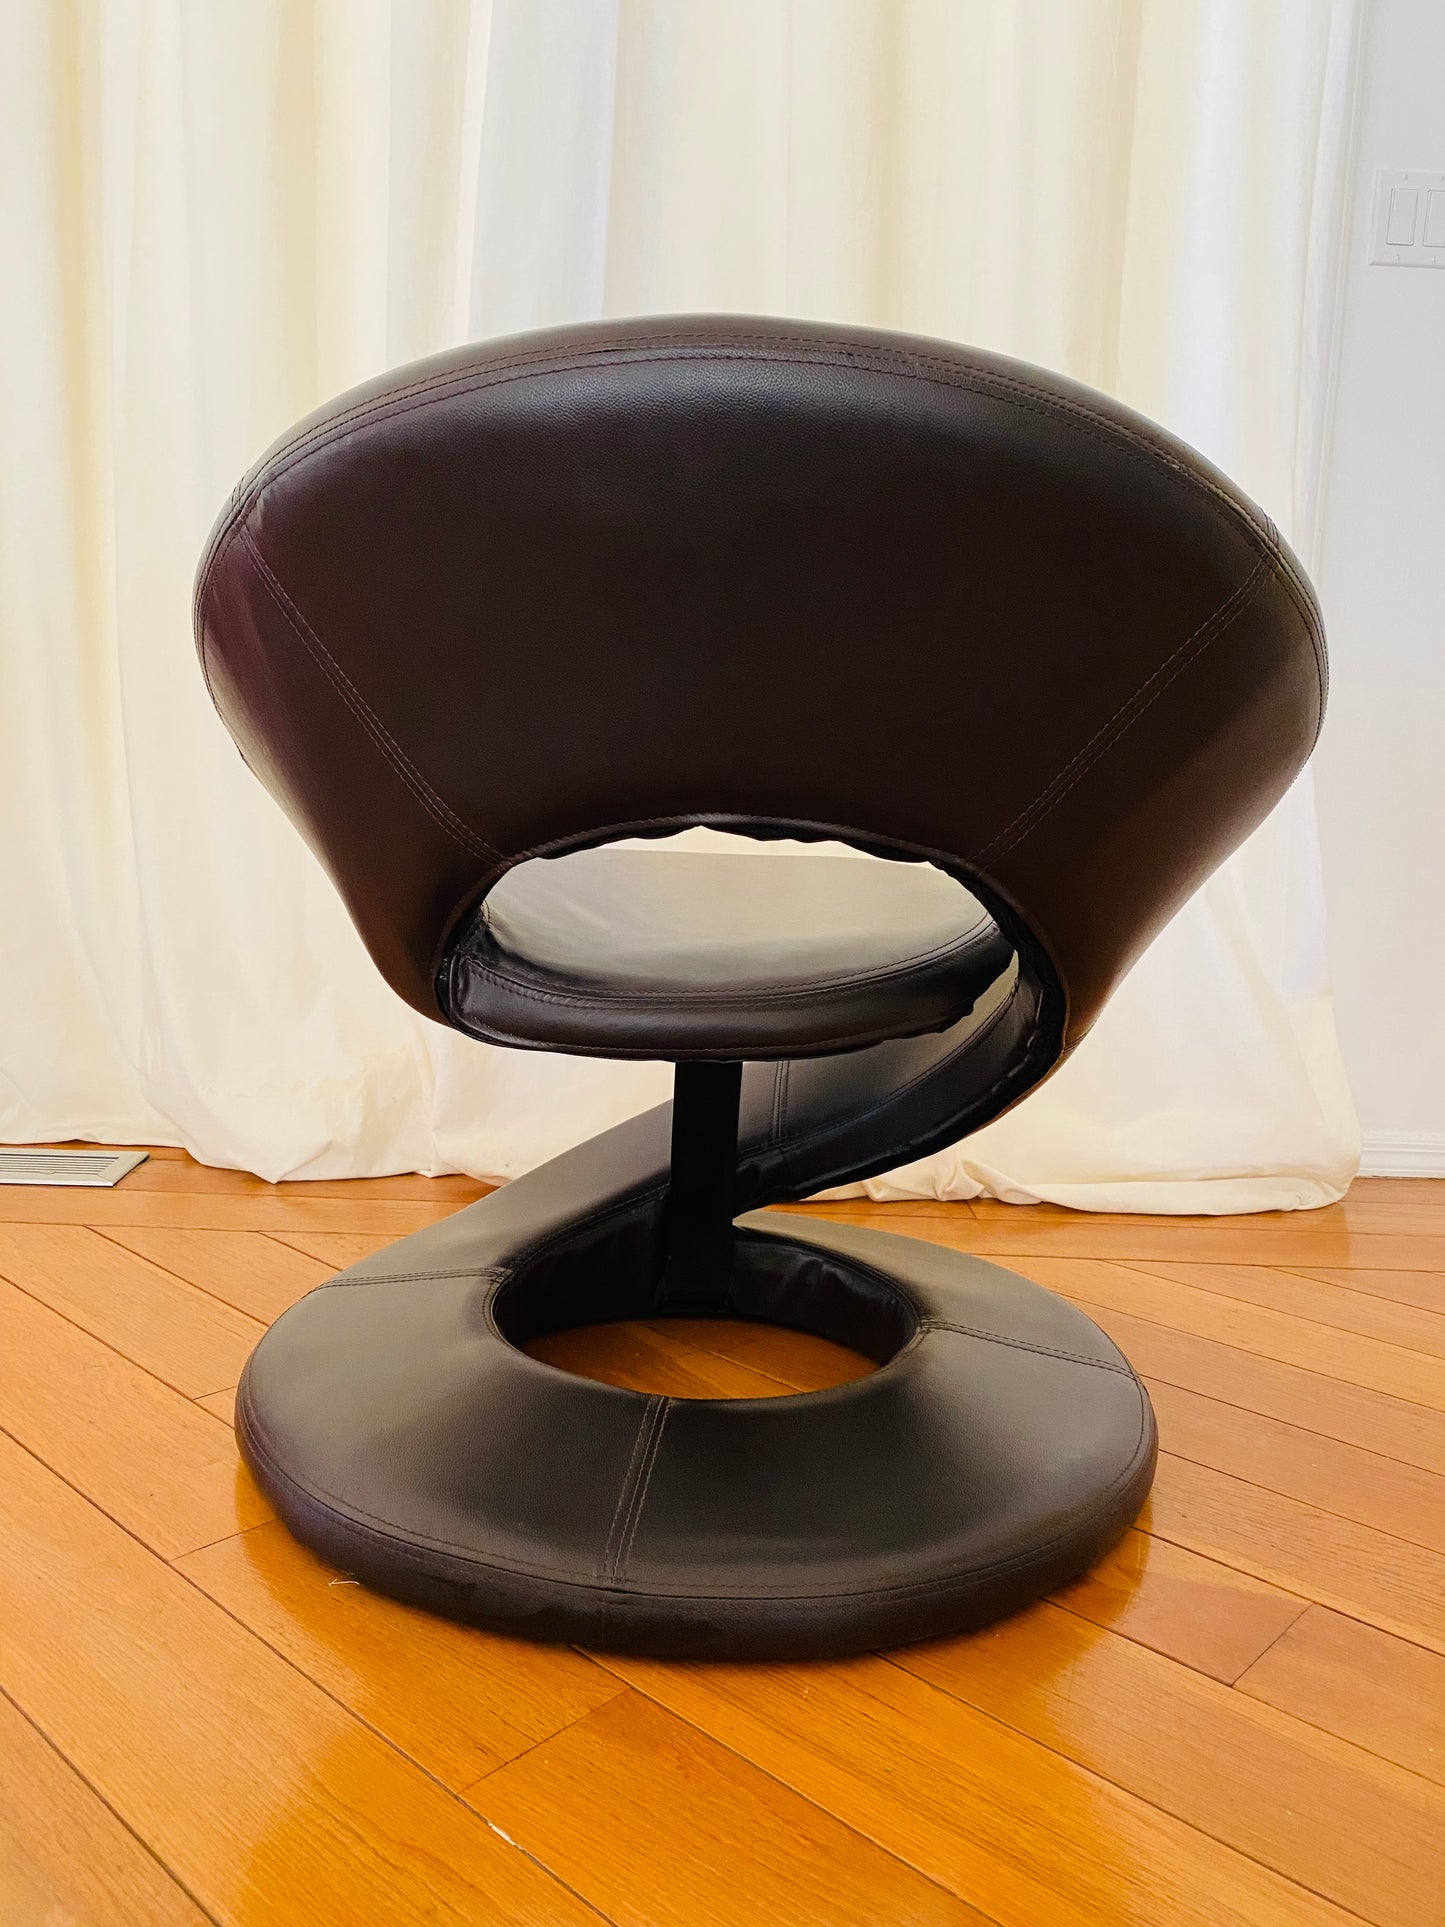 Chocolate Brown Jaymar Spiral Chair, Style After Louis Durot